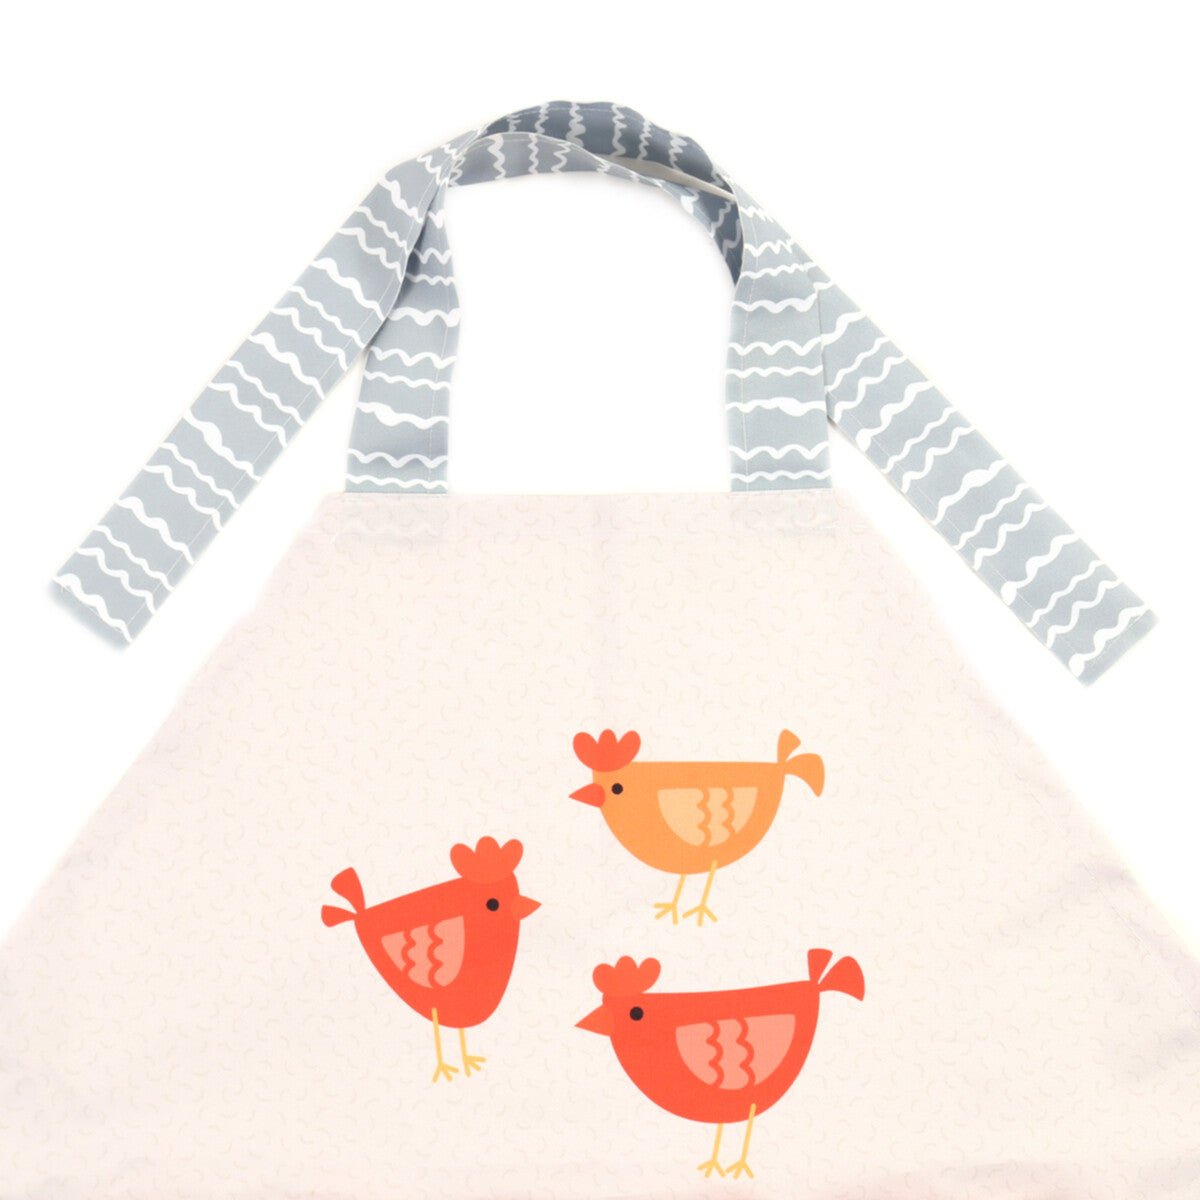 DIY Collectible Apron - Eggsactly Red Chickens Apron Sewing Kit - Art & Craft Kits - Bibs And Boots Fabric